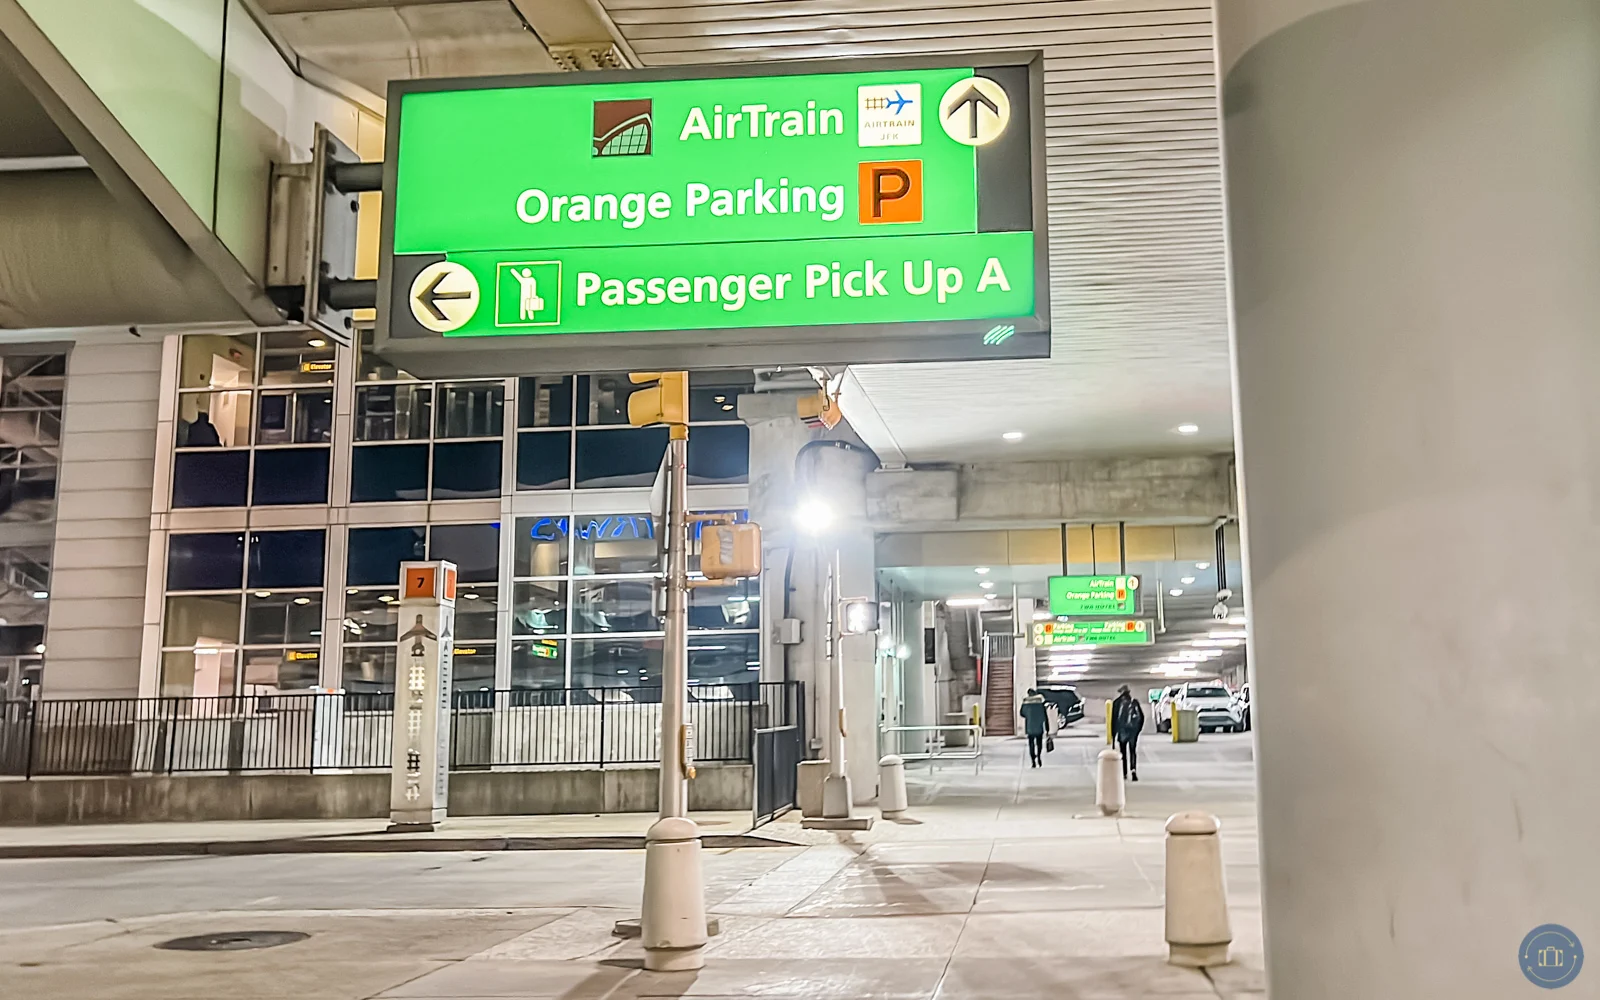 exit the terminal and cross the road to follow signs for airtrain at jfk airport